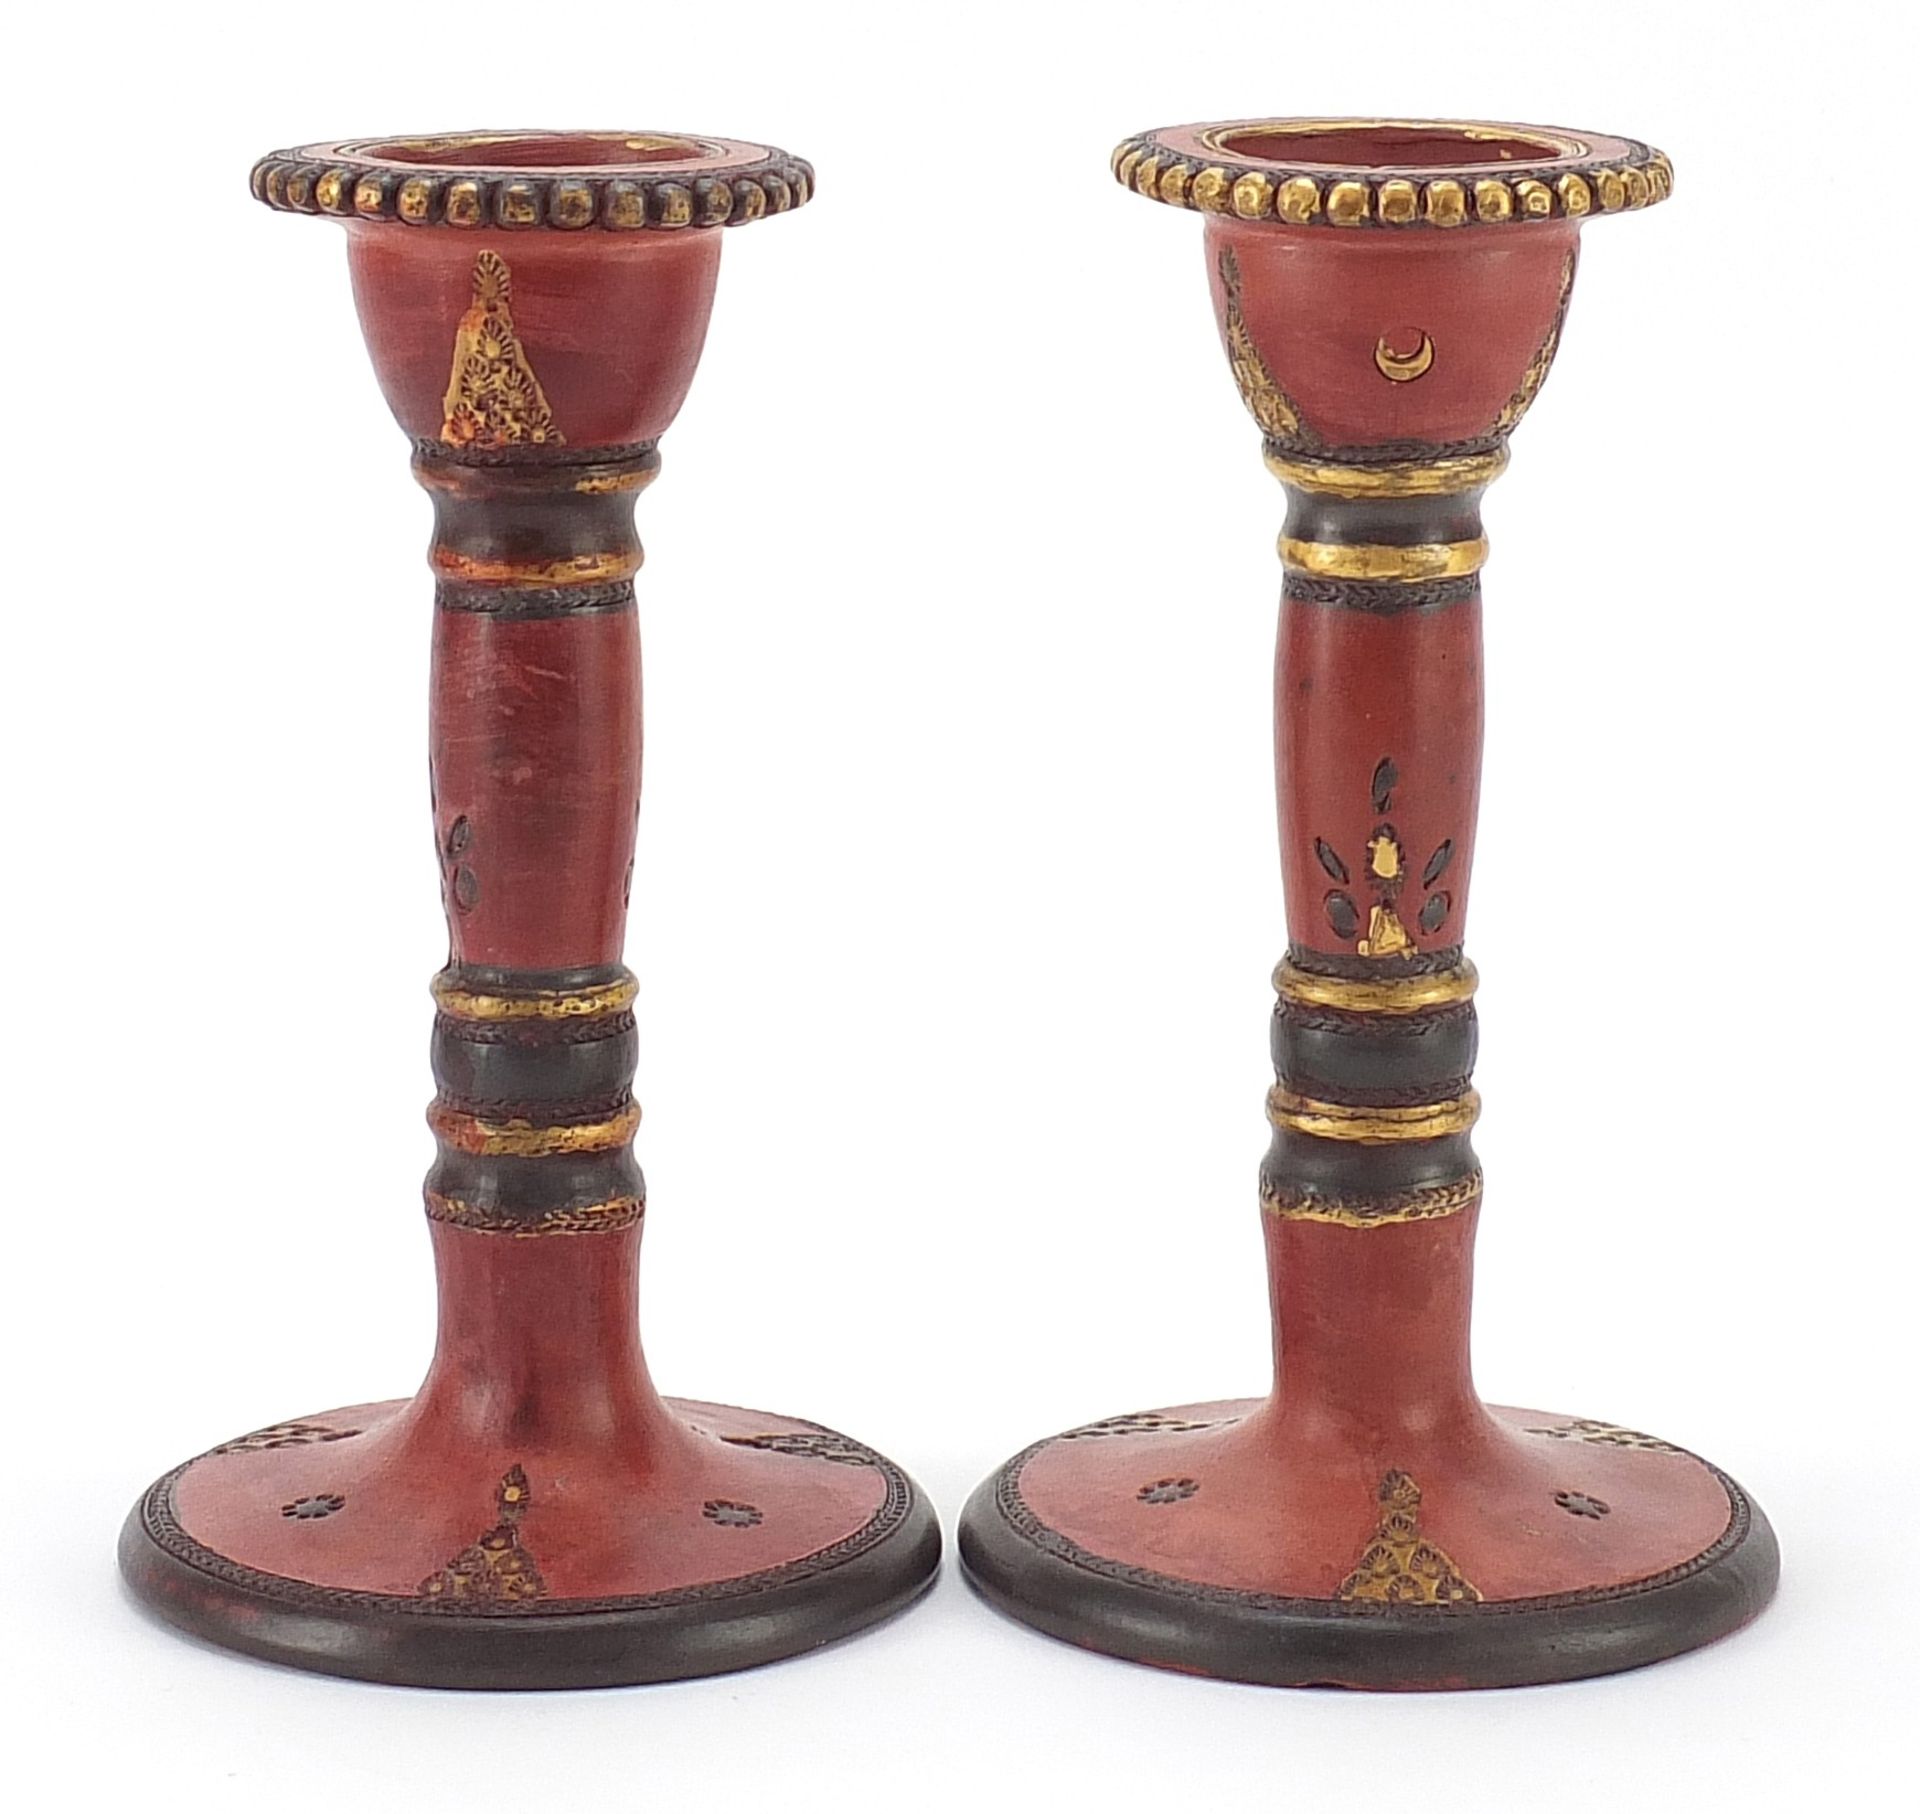 Pair of Turkish Tophane pottery candlesticks, each 18cm high